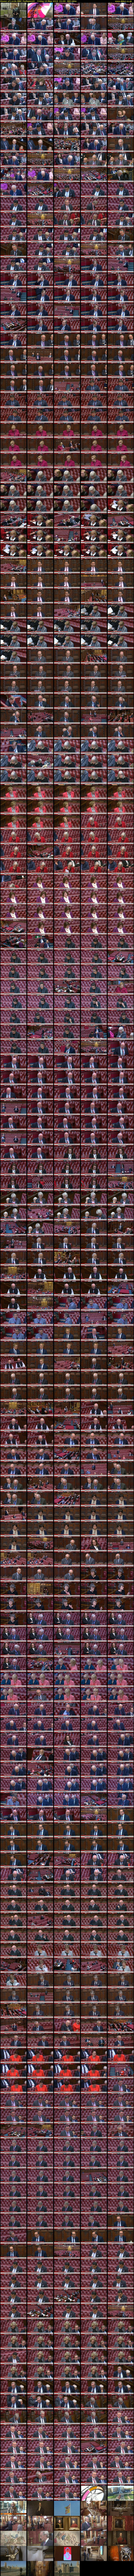 House of Lords (BBC Parliament) Friday 10 May 2019 01:00 - 09:00